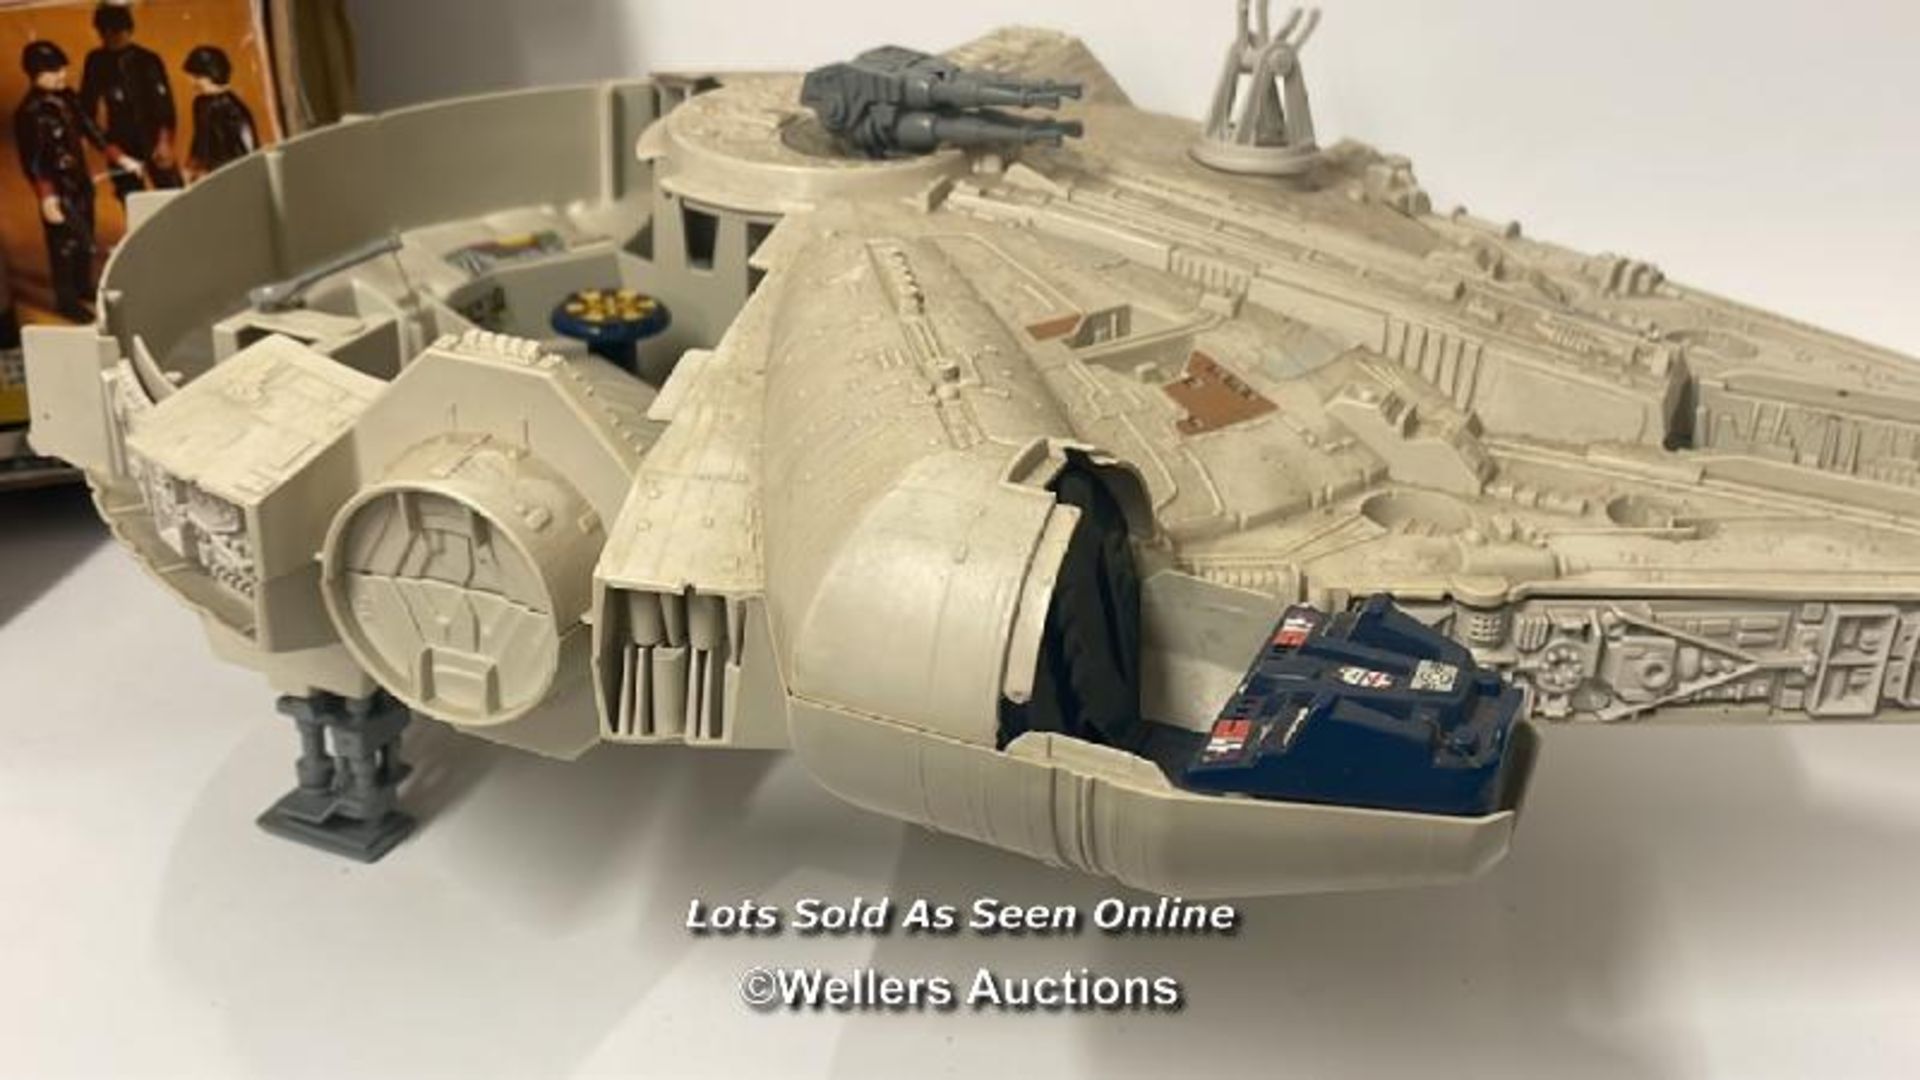 Palitoy vintage Return of the Jedi Millenium Falcon vehicle, with original training ball and floor - Image 9 of 11